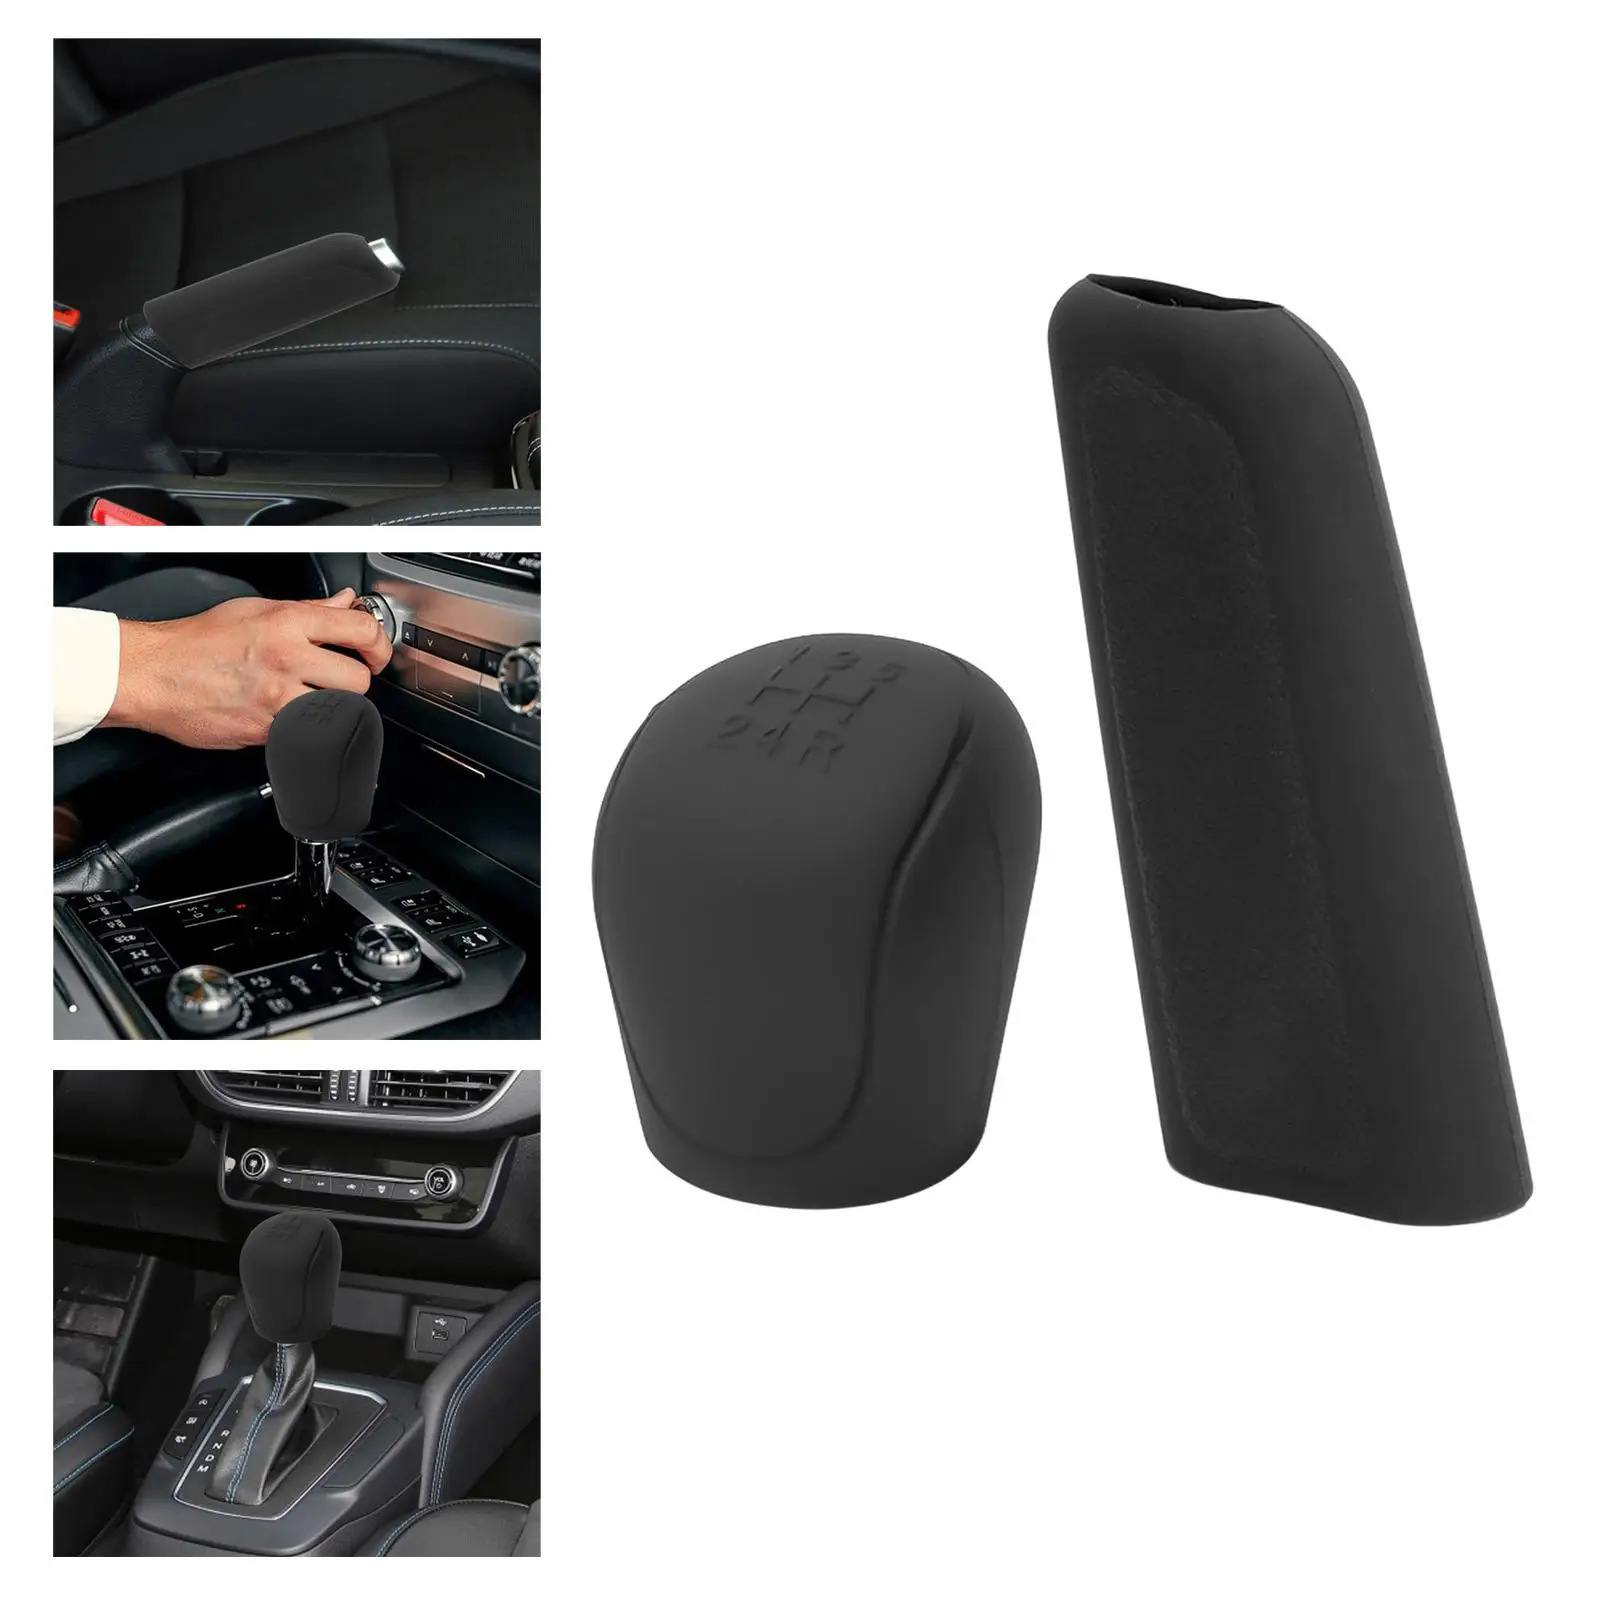 Automotive Gear Shift Cover Protector for Ford Focus Escort Transit Replace Parts